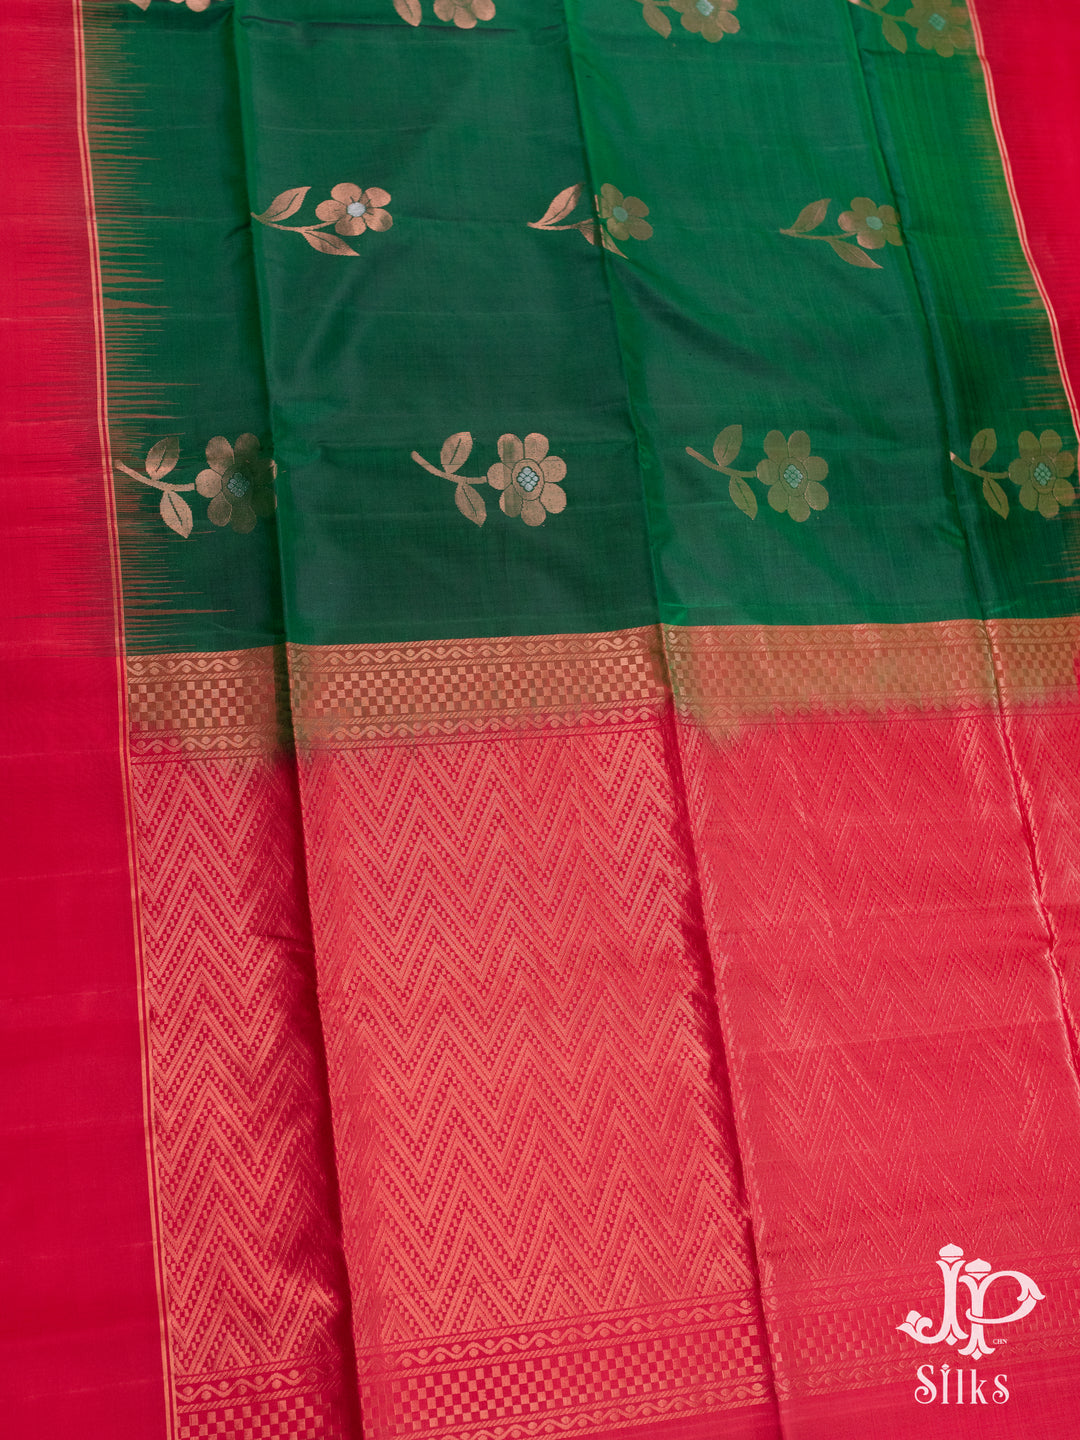 Bottle Green and Red Soft SIlk Saree - D1814 - View 3